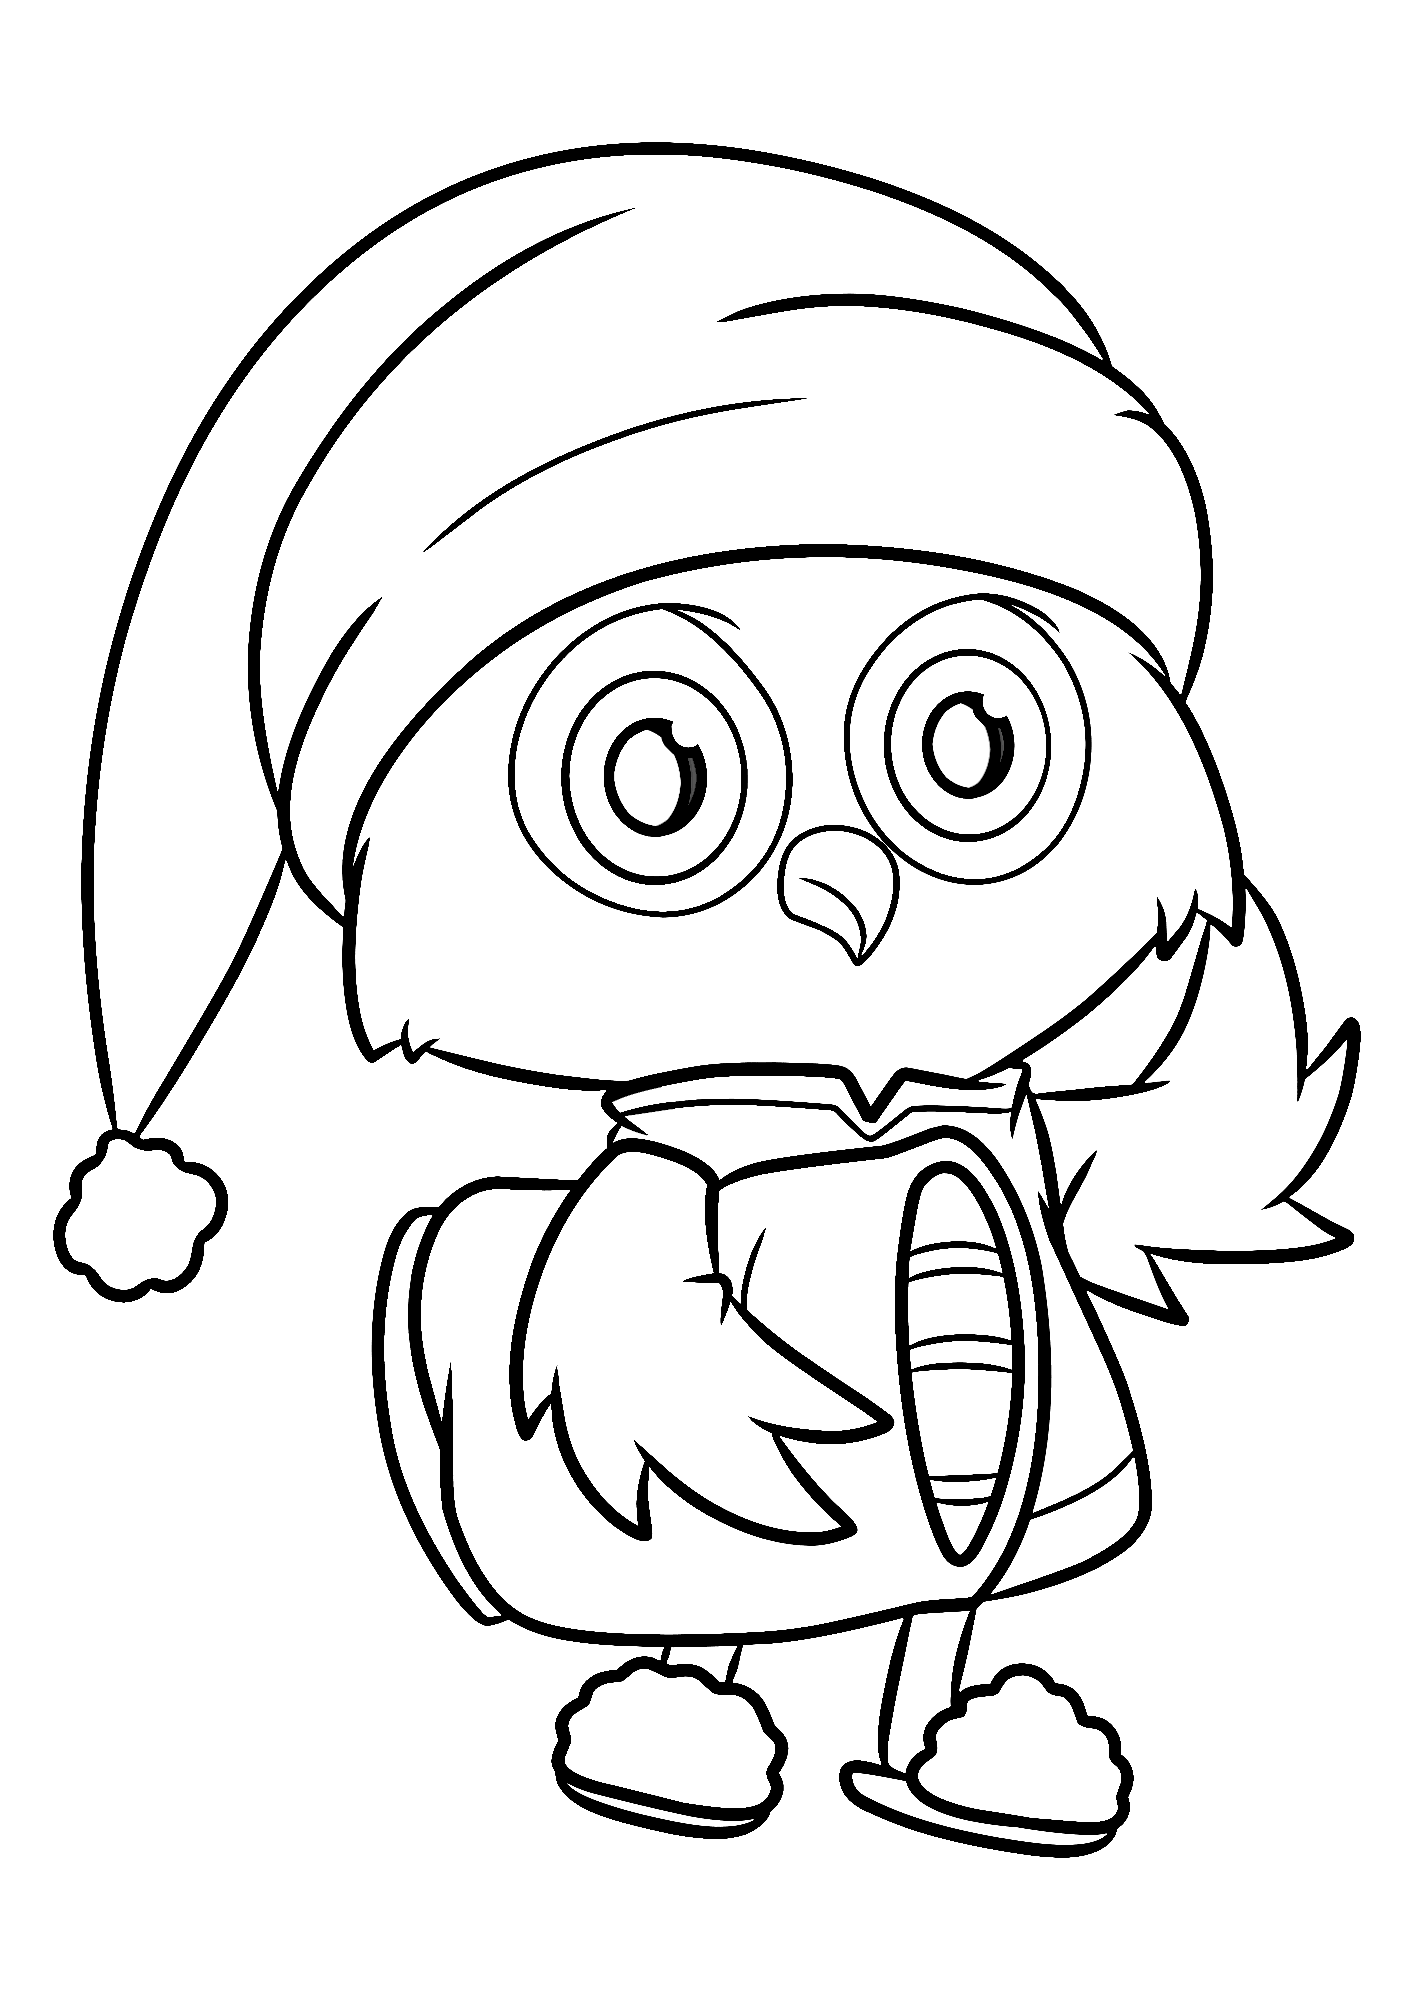 Owls Printable Coloring Pages